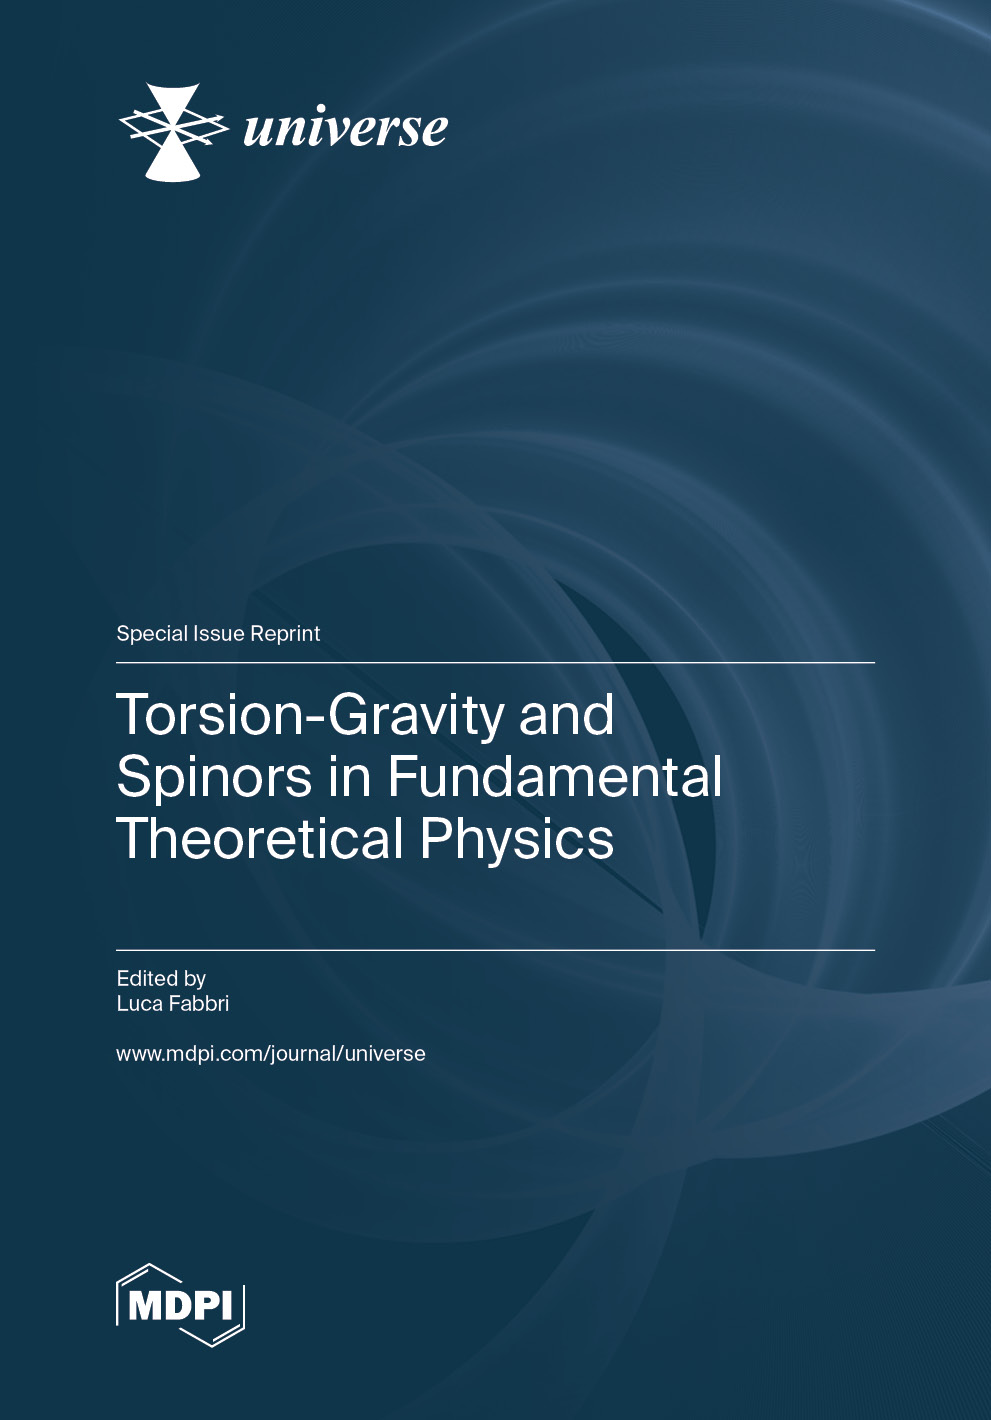 Special issue Torsion-Gravity and Spinors in Fundamental Theoretical Physics book cover image